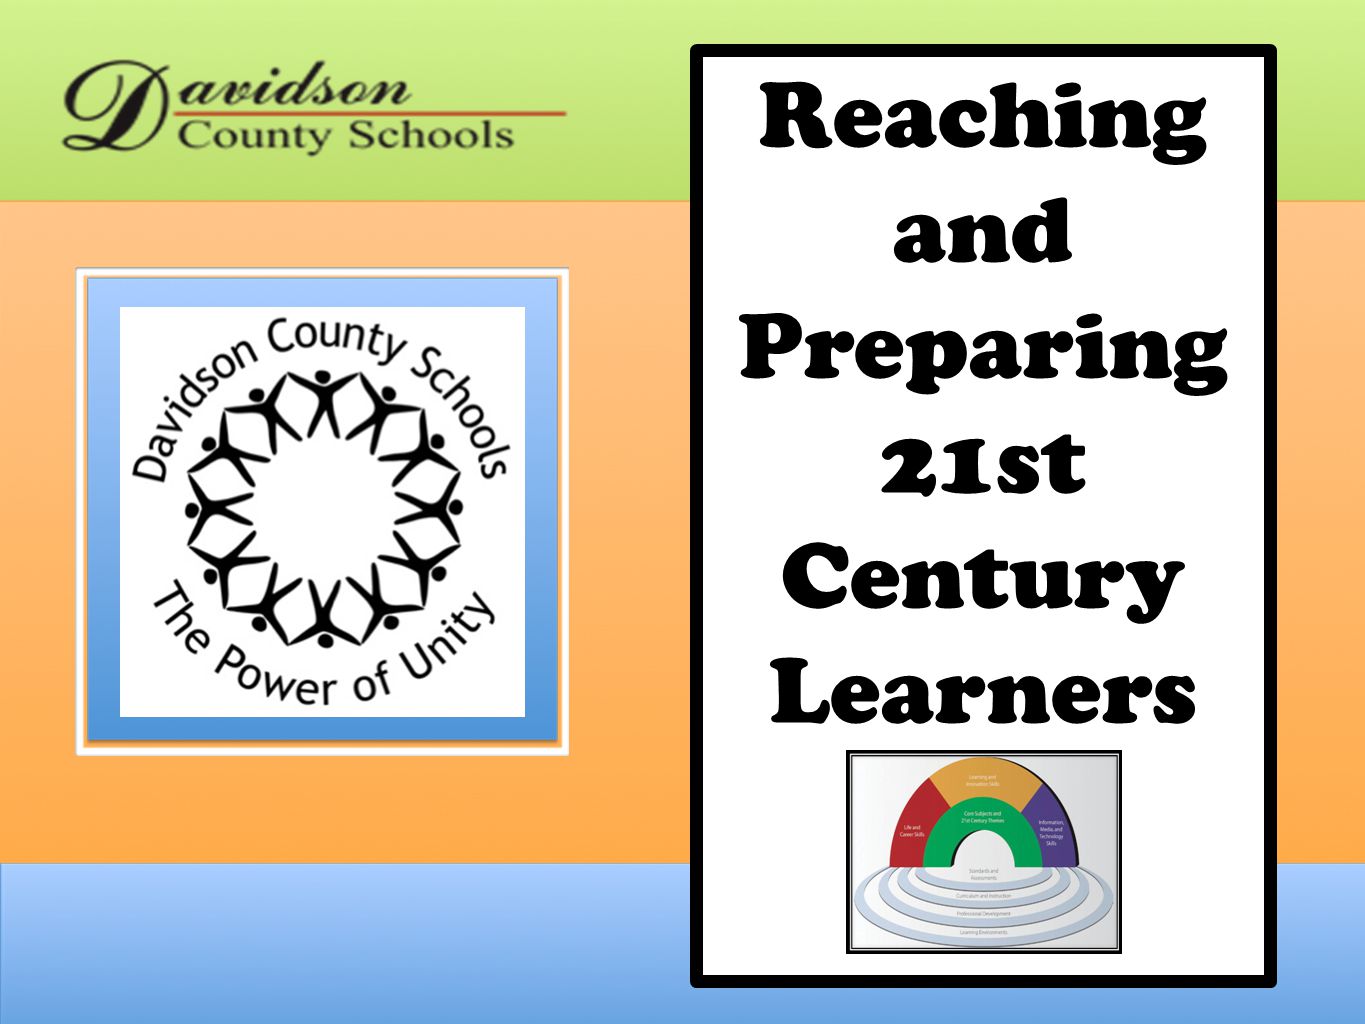 Reaching and Preparing 21st Century Learners